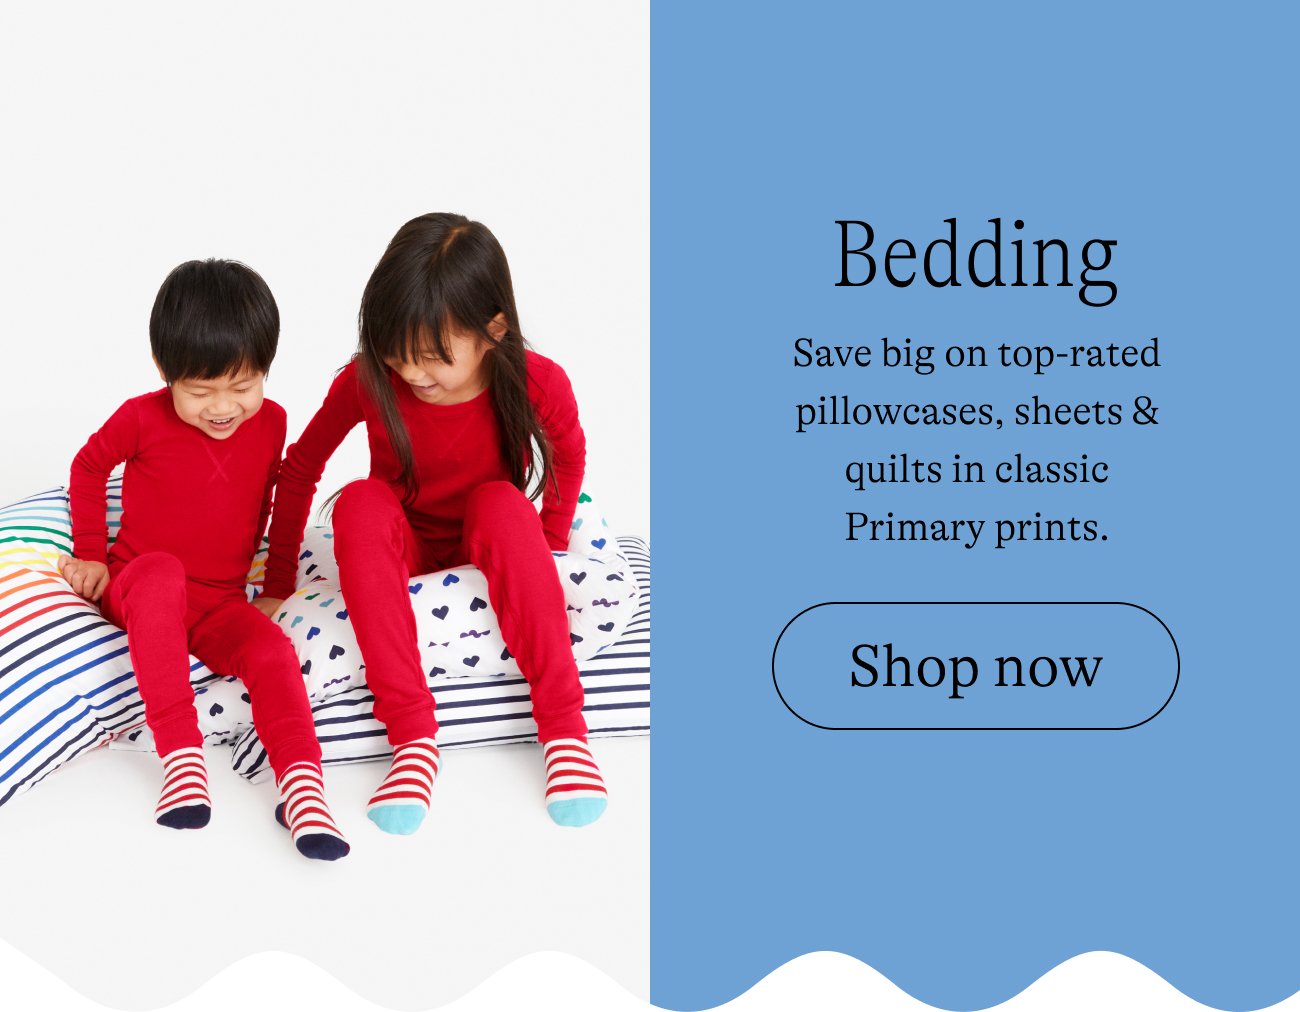 Bedding: Save big on top-rated pillowcases, sheets & quilts in classic Primary prints. Shop now